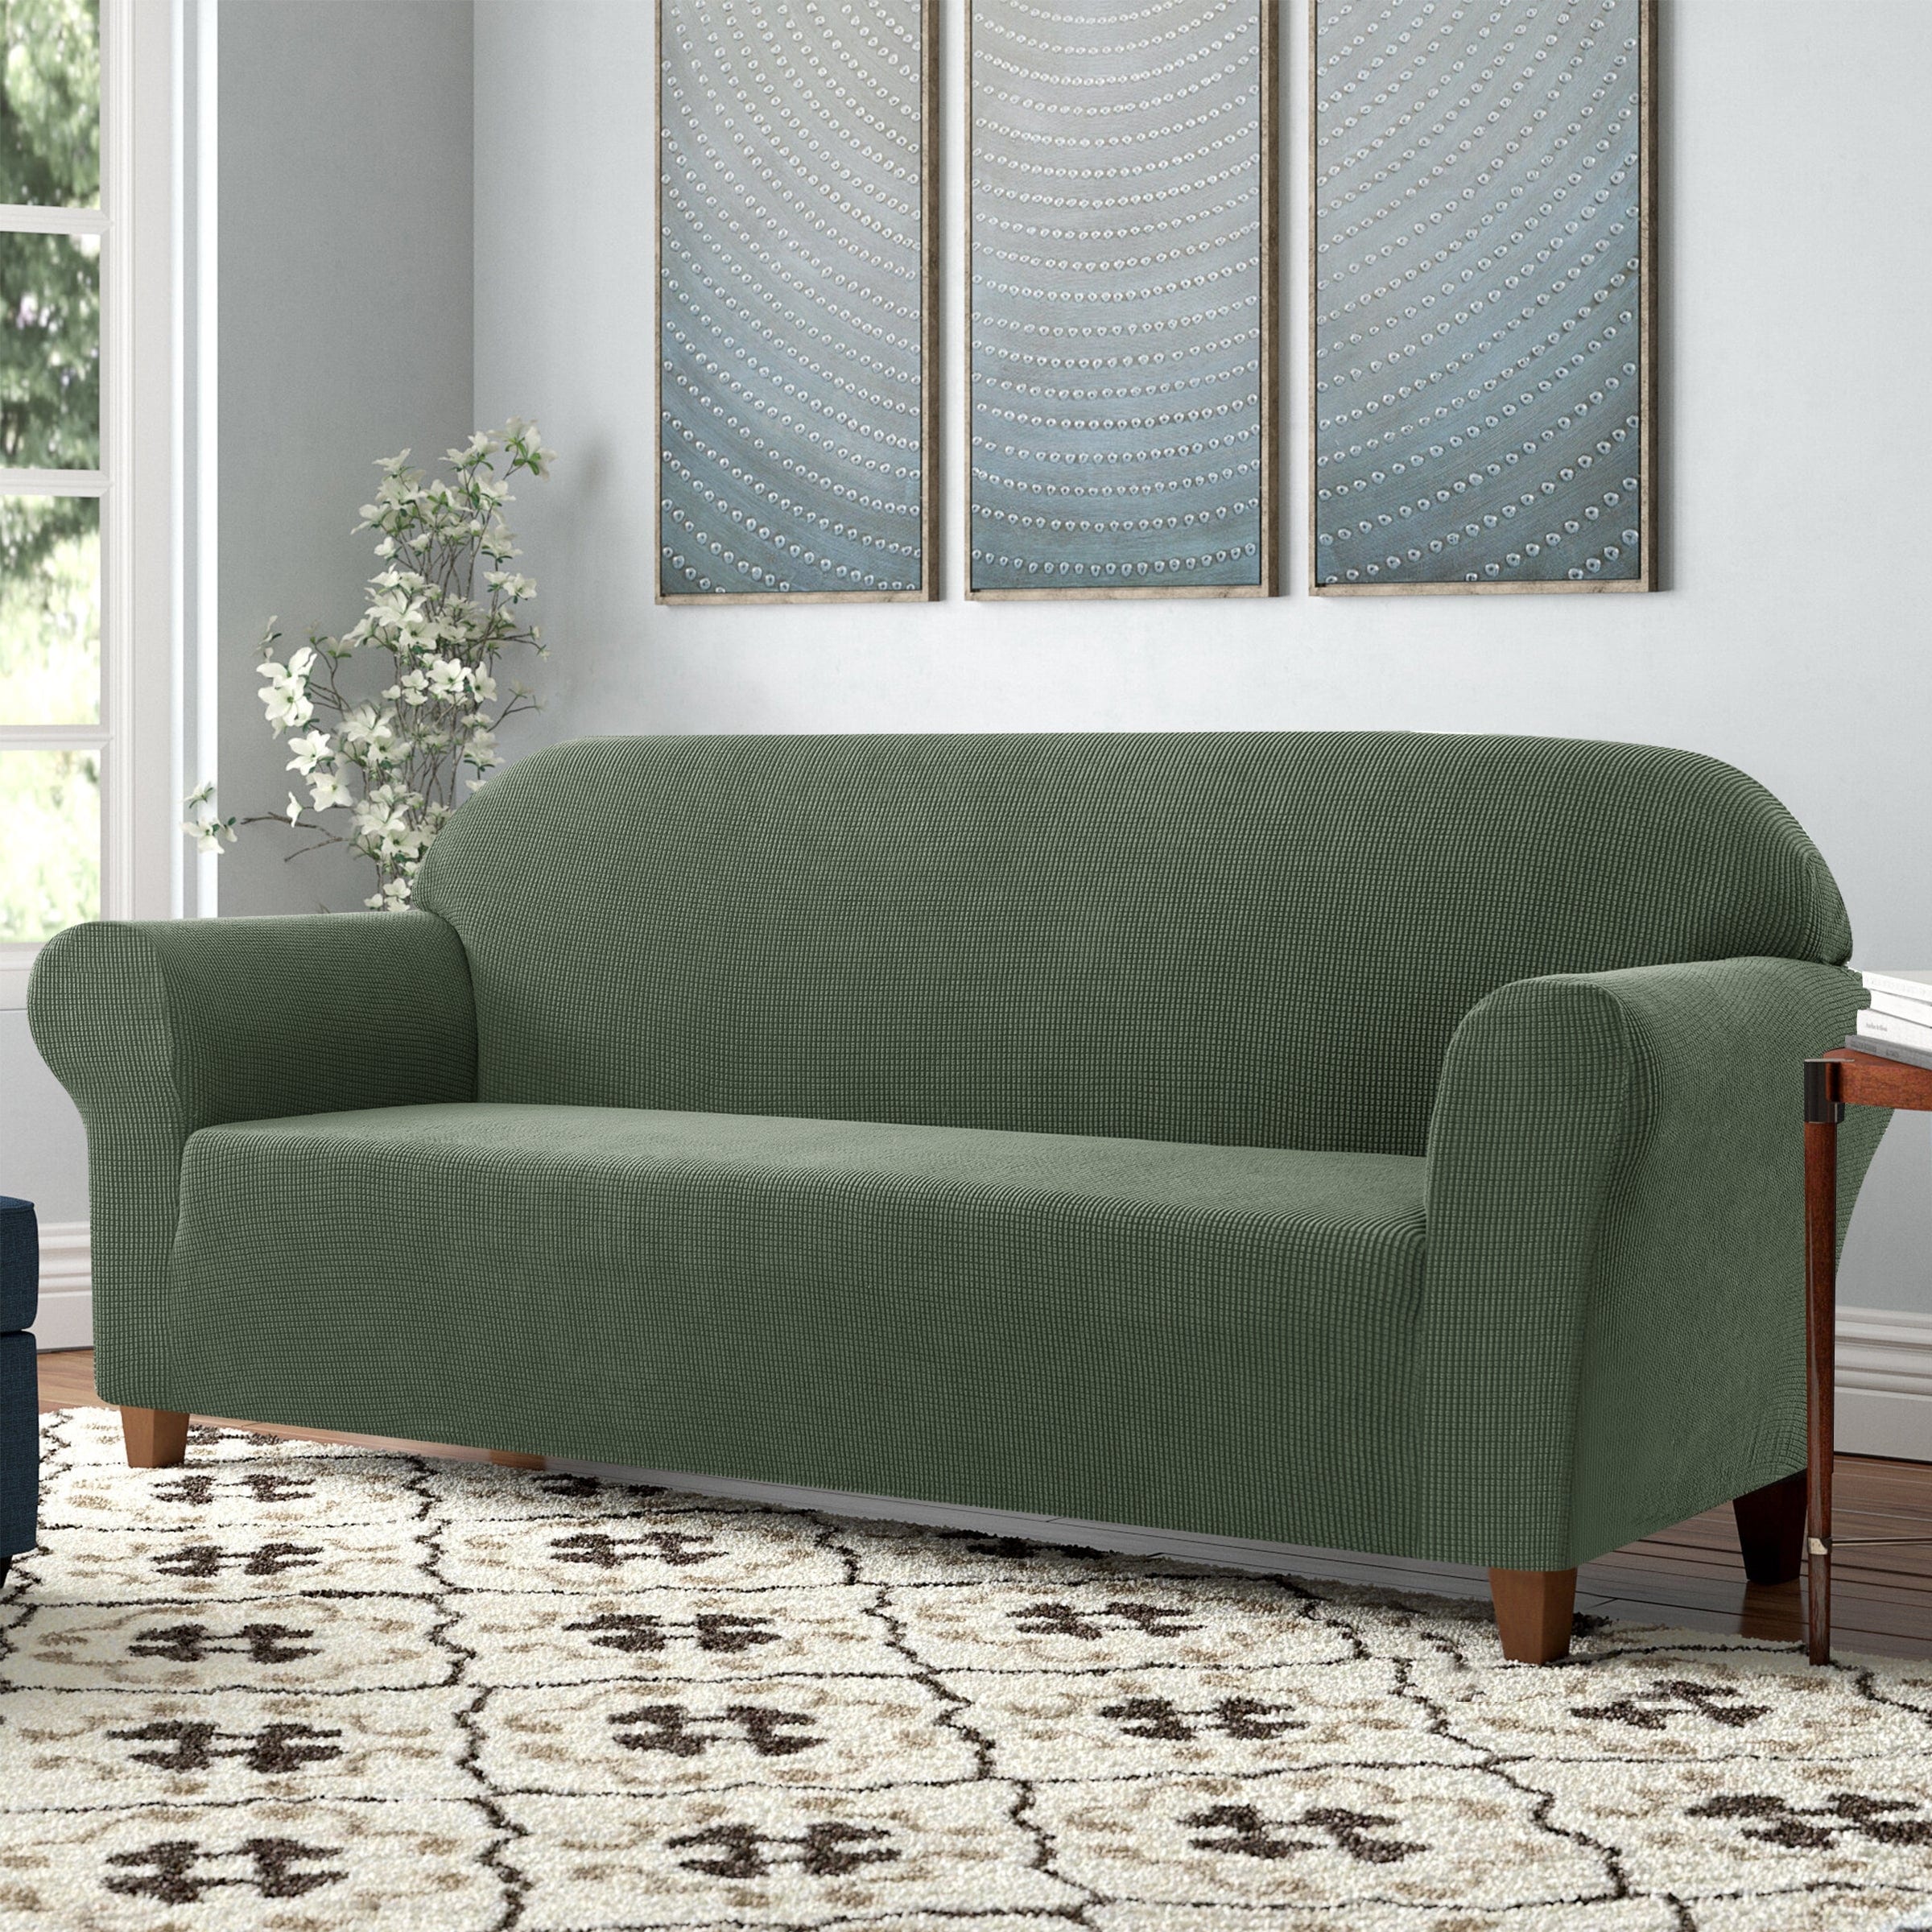 https://ak1.ostkcdn.com/images/products/is/images/direct/a9ddca3805f8f008934e27723562225c5f9f8048/Subrtex-1-Piece-Sofa-Slipcover-Stretch-Spandex-Furniture-Protector.jpg